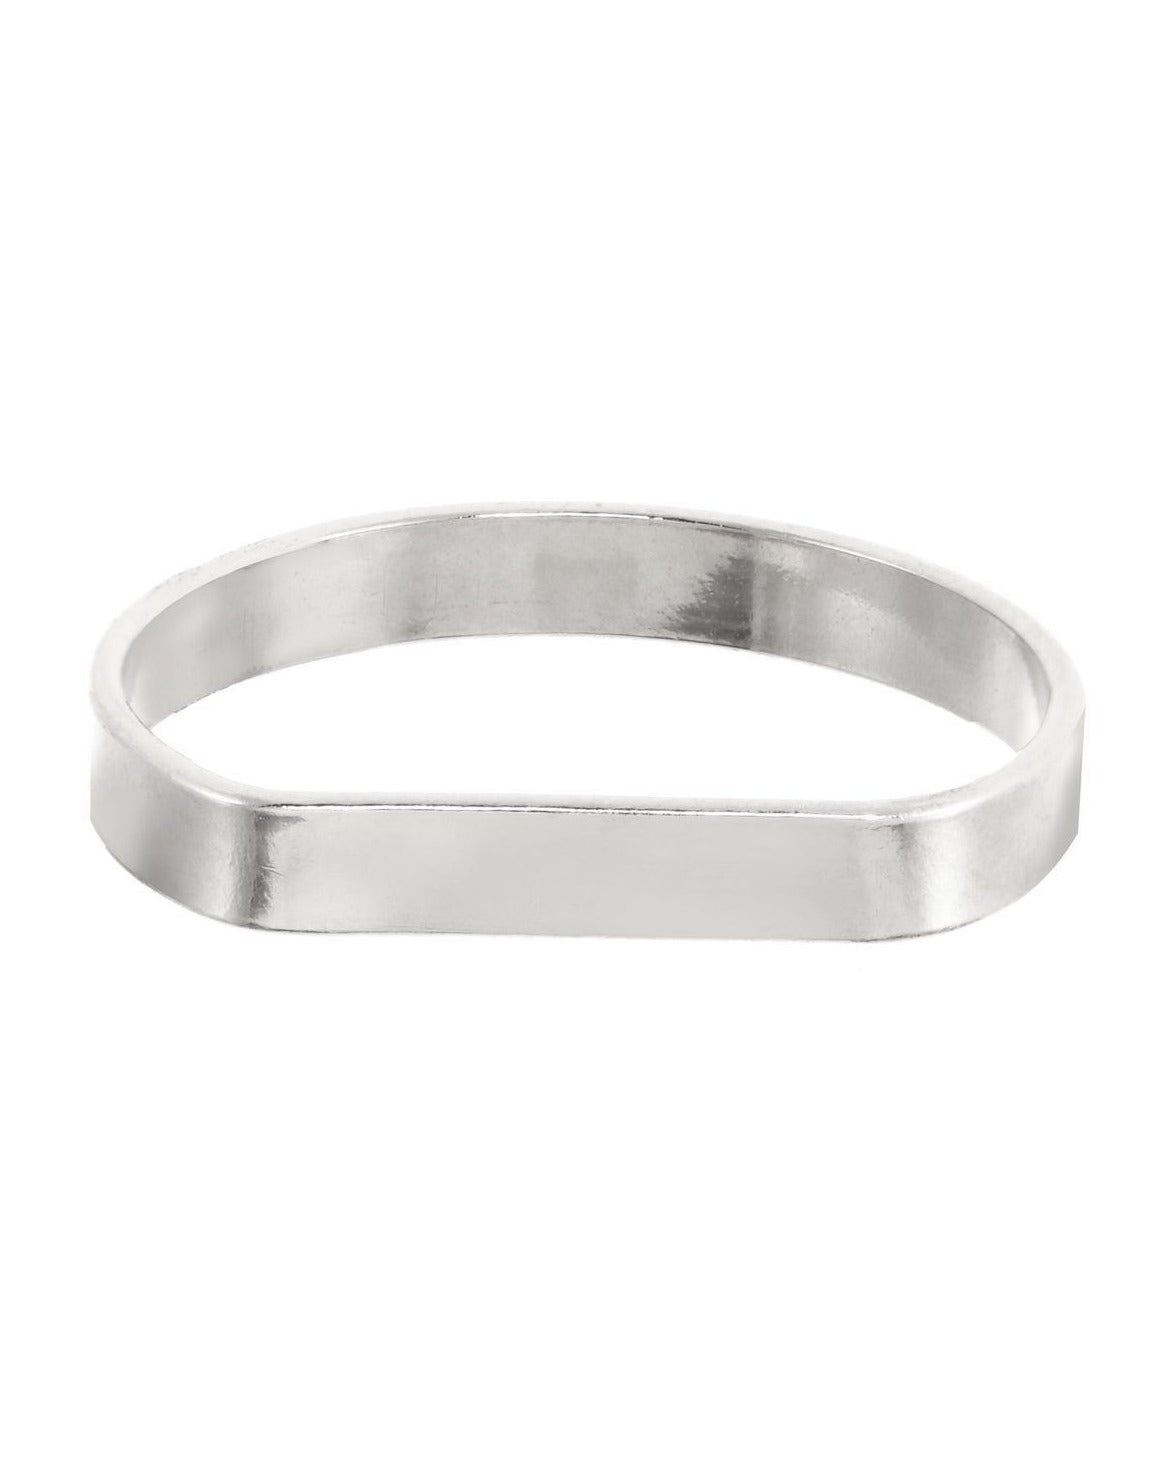 Plateau Ring by KOZAKH. A 2mm flat ring crafted in Sterling Silver.